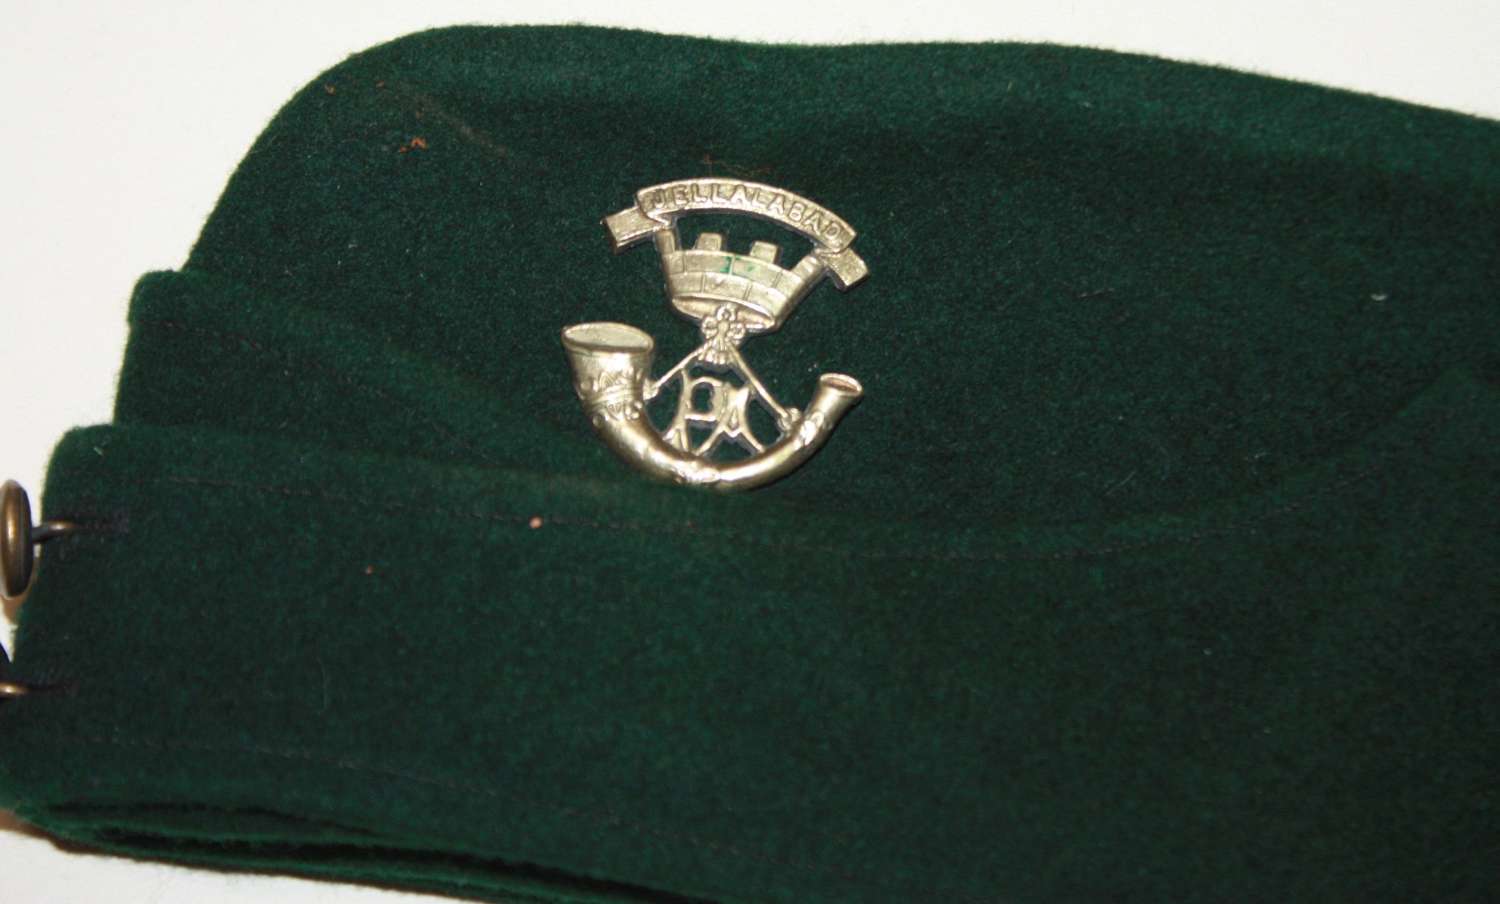 A WWII PERIOD SOMERSET LIGHT INFANTRY OTHER RANKS SIDE CAP